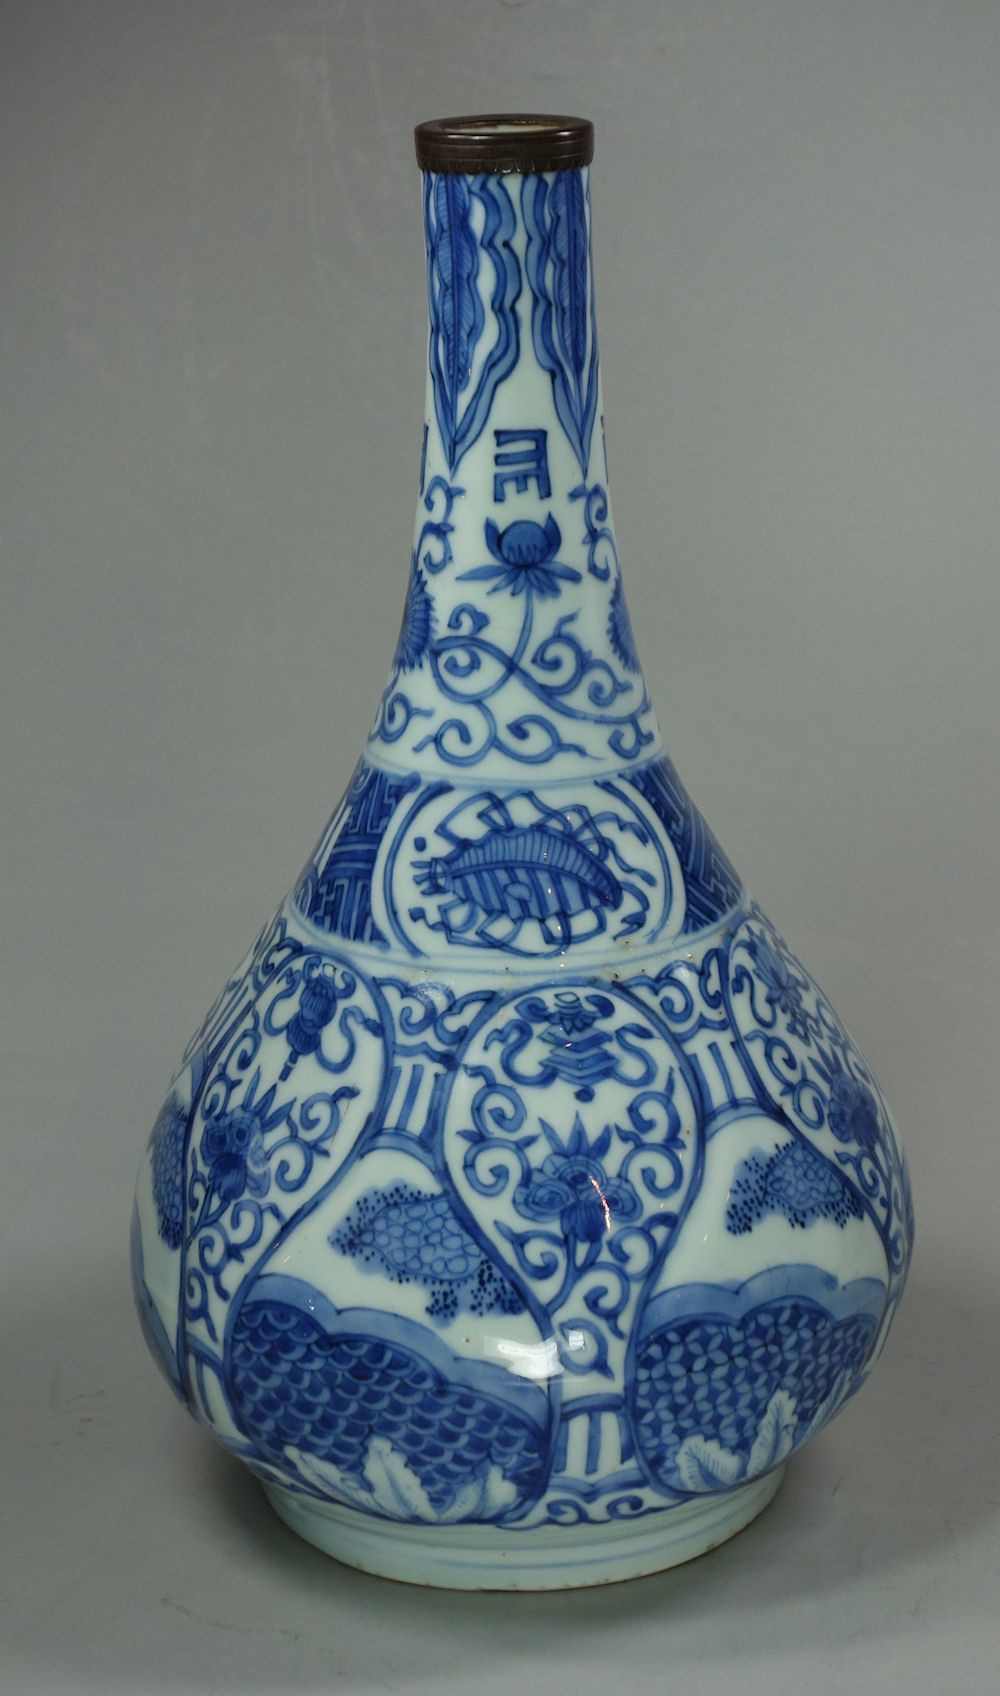 white porcelain vase of chinese blue and white kraak bottle vase wanli 1573 1610 with a pertaining to chinese blue and white kraak bottle vase wanli 1573 1610 with a moulded body of stylised foliage height 10 1 4in 26 cm